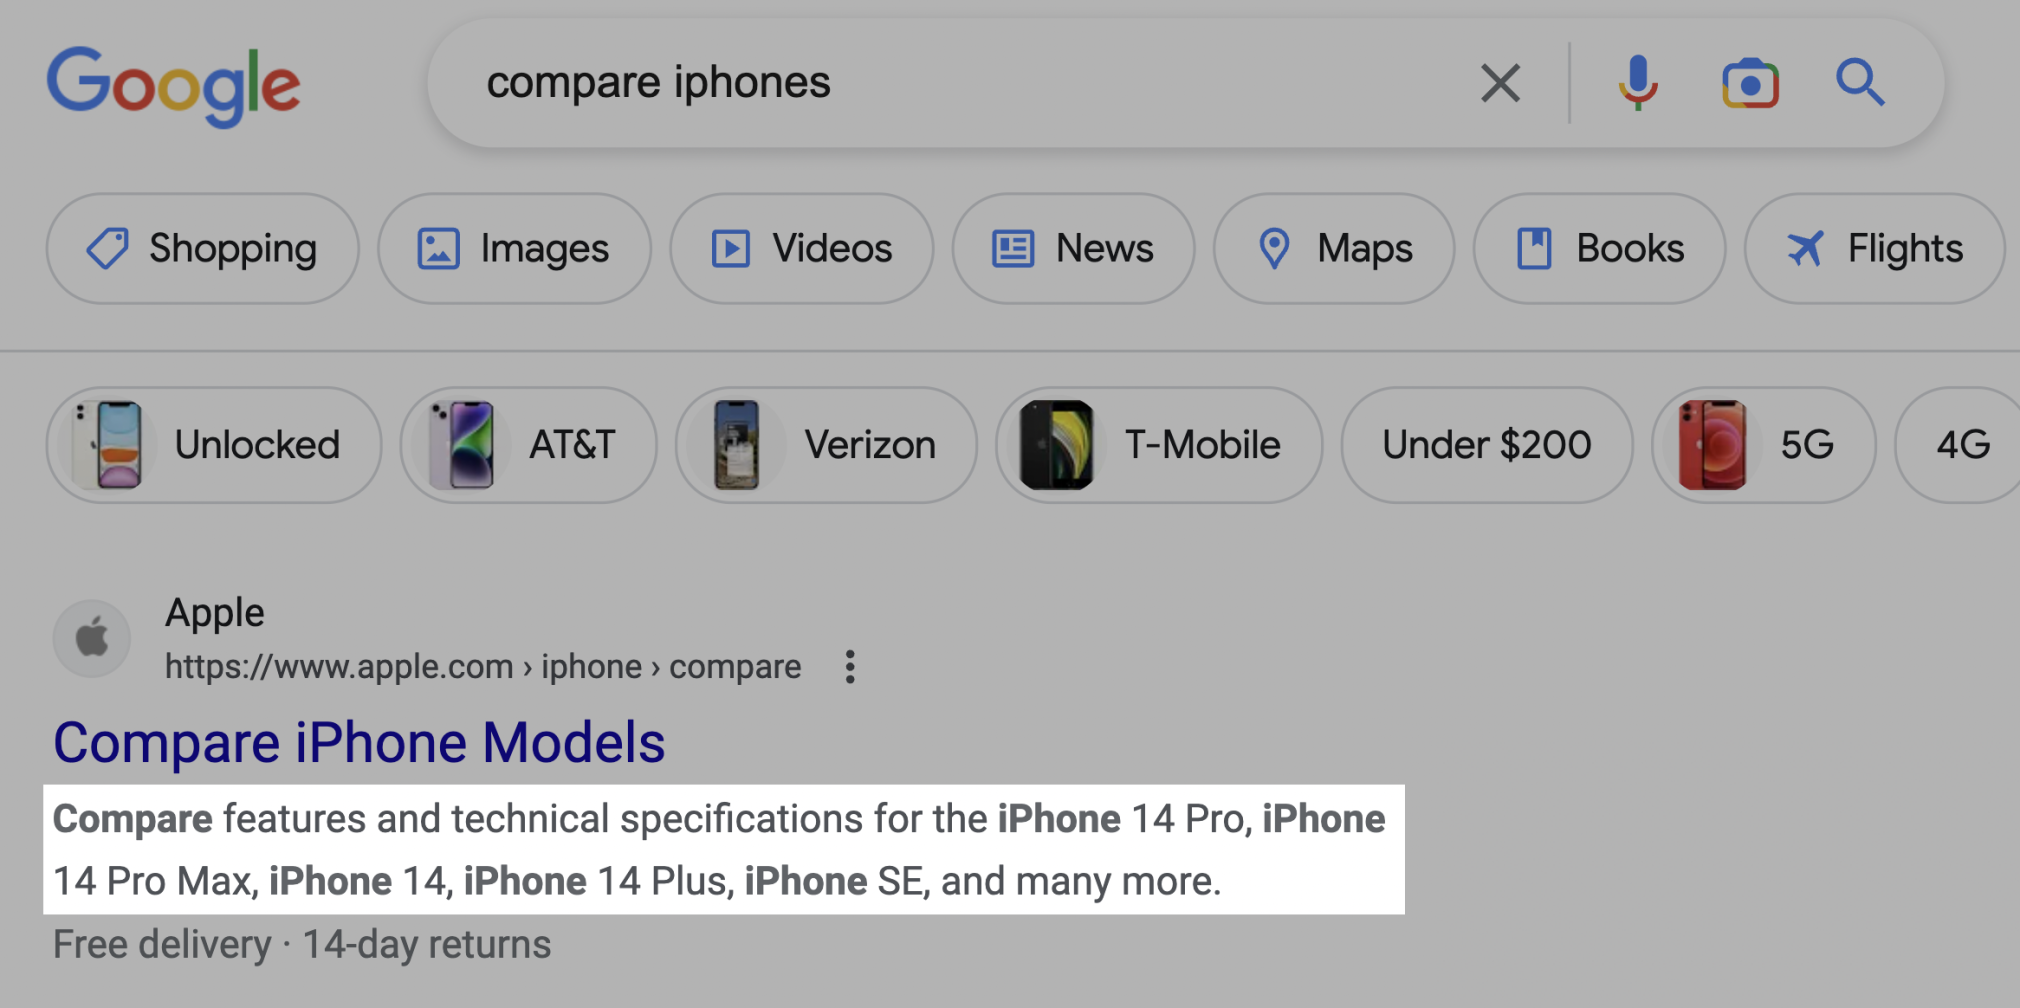 Search engine results for compare iphones, highlighting the meta description